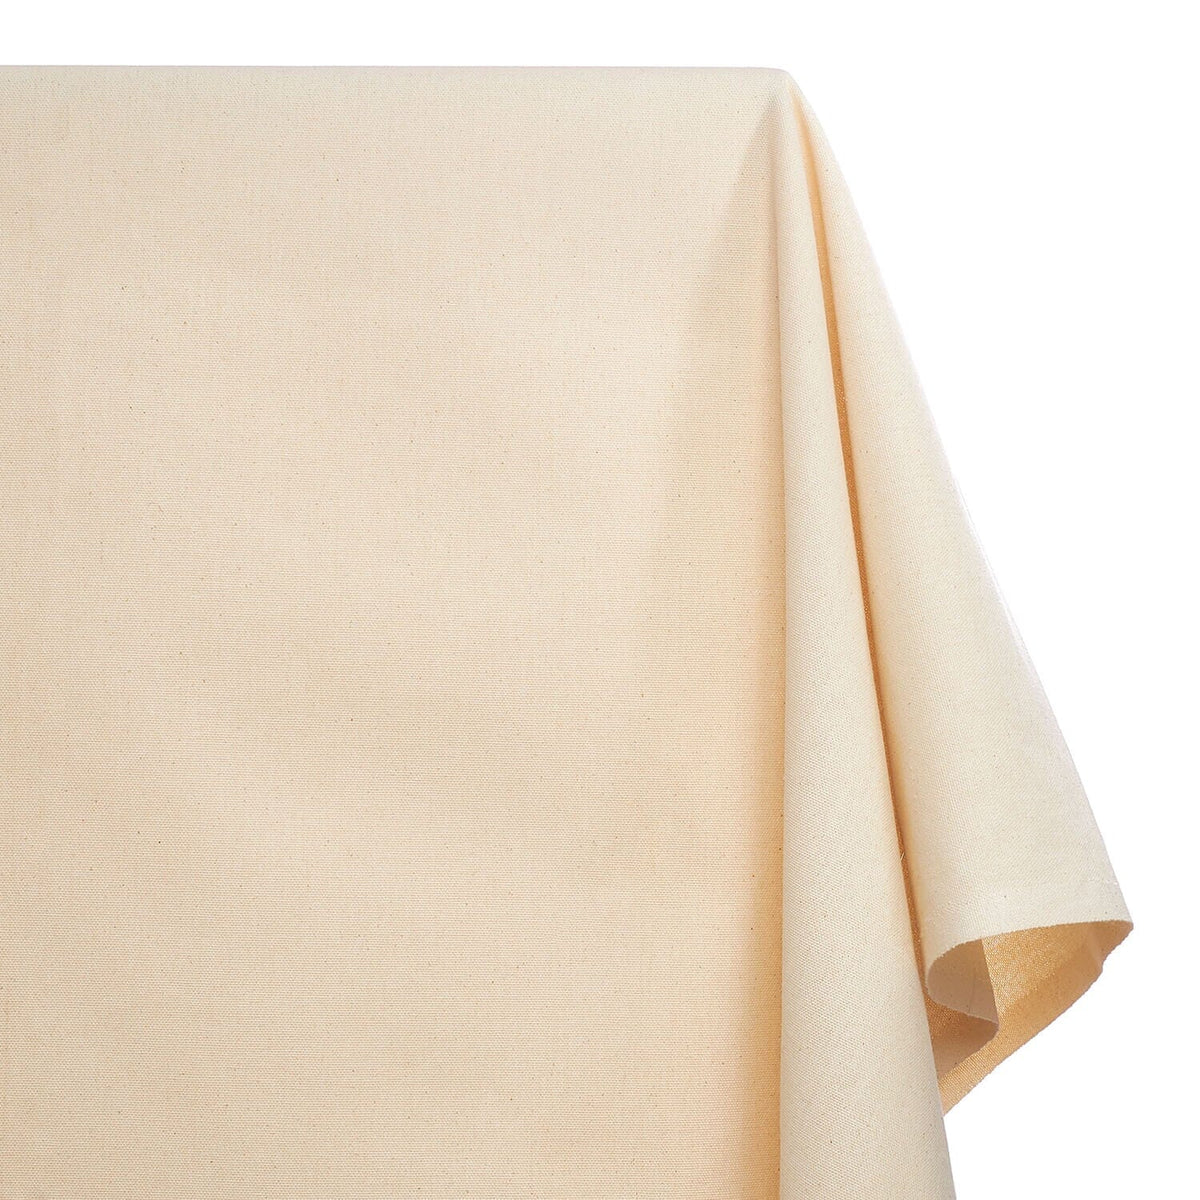 100% Natural Cotton 7 oz (280g) Canvas Fabric (Duck), 63 Inches Wide X 3  Yards Long